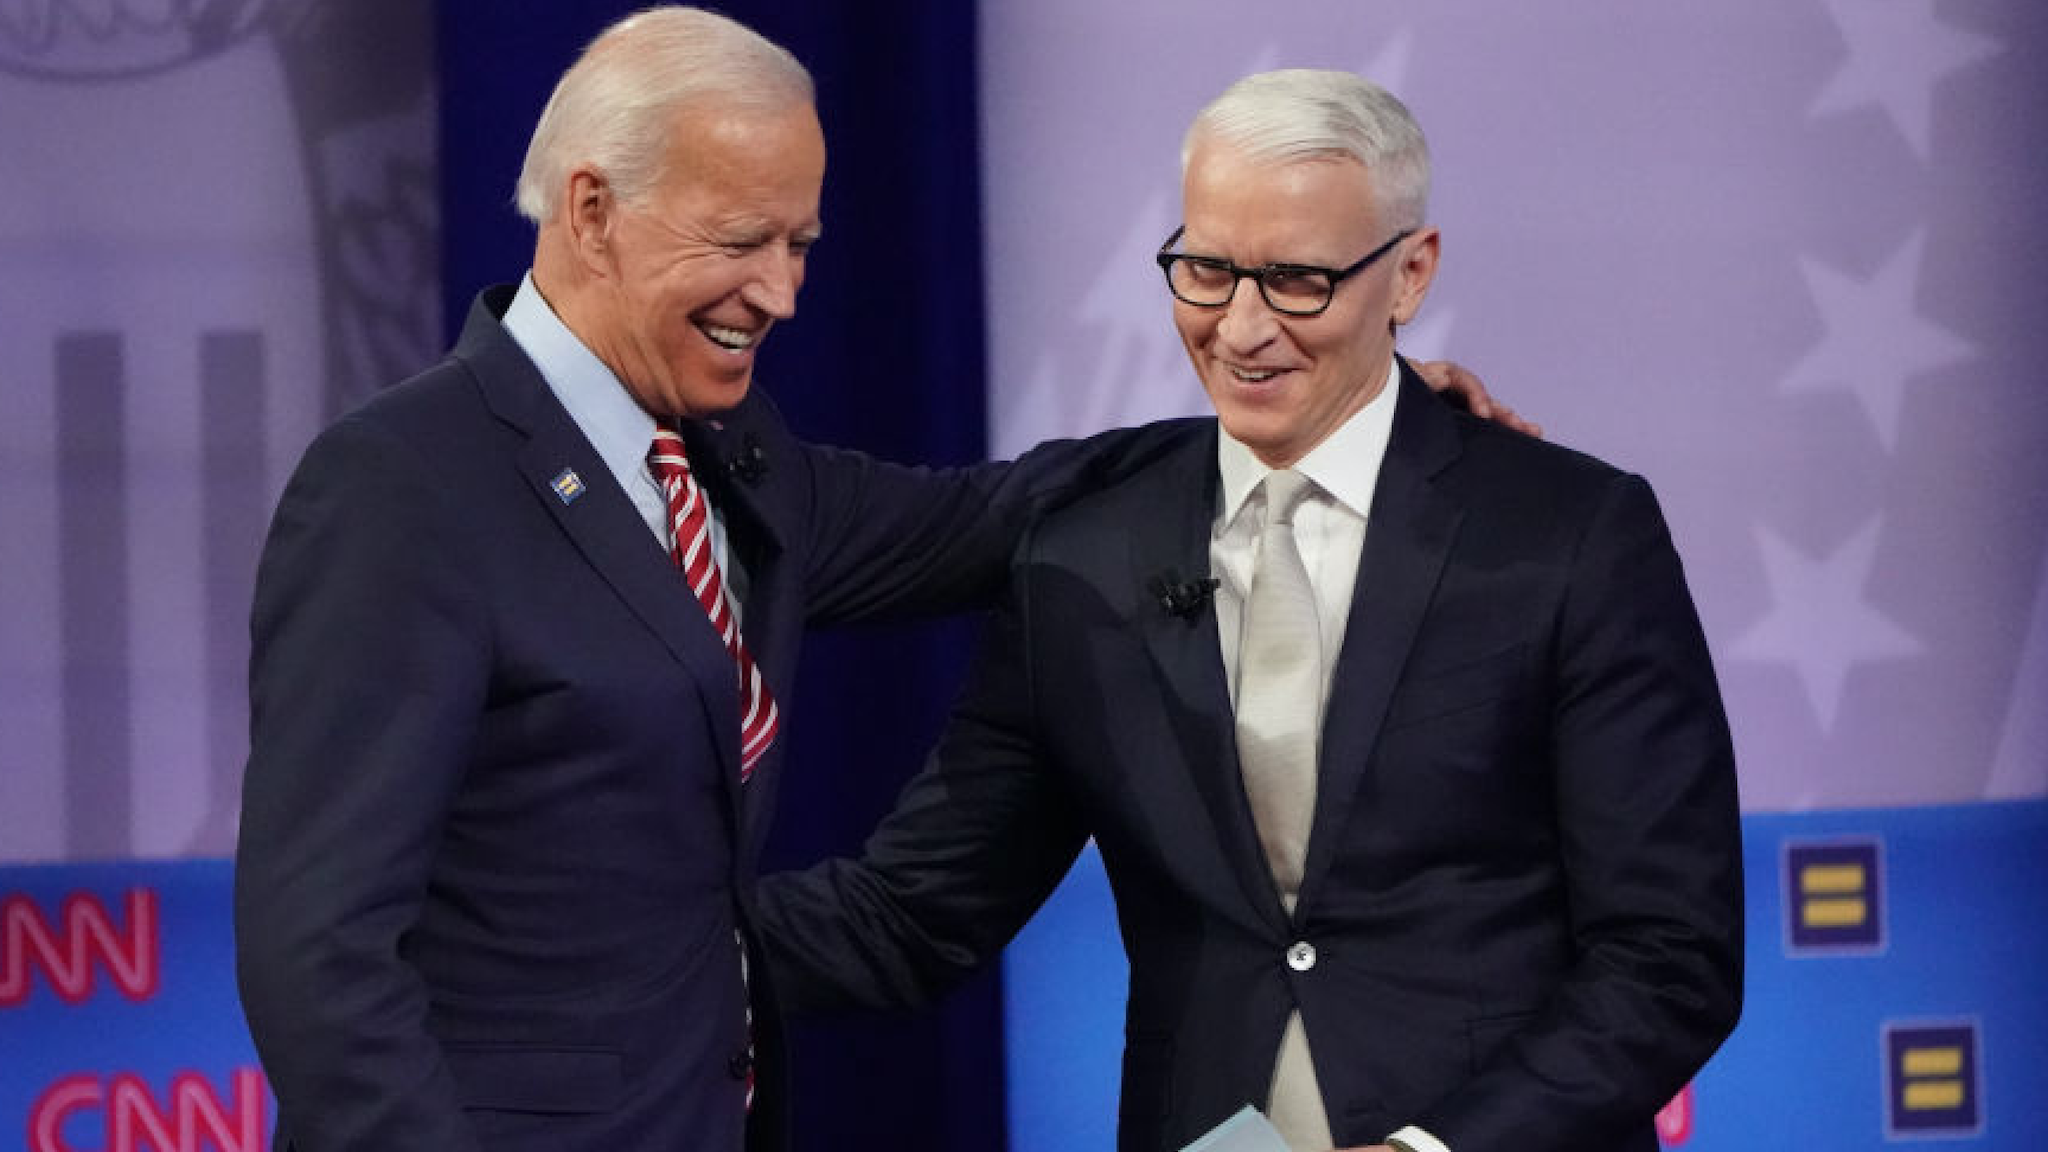 Democratic presidential candidate, former Vice President Joe Biden (L) embraces CNN moderator Anderson Cooper at the Human Rights Campaign Foundation and CNN presidential town hall, focused on LGBTQ issues, on October 10, 2019 in Los Angeles, California.